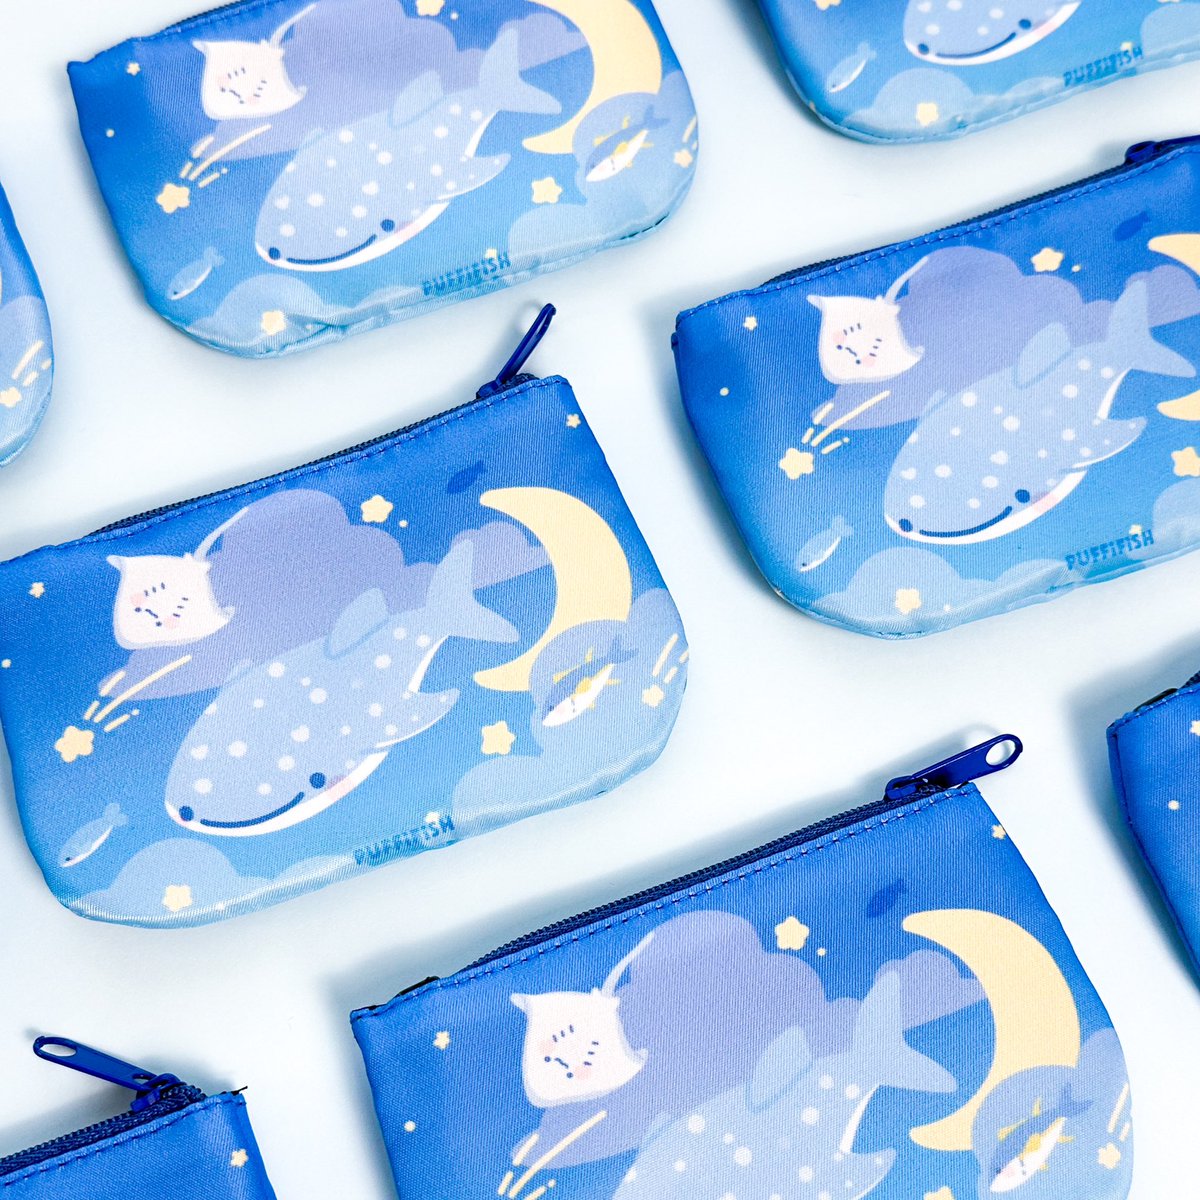 「Starry ocean coin pouch  」|puffi🐟のイラスト